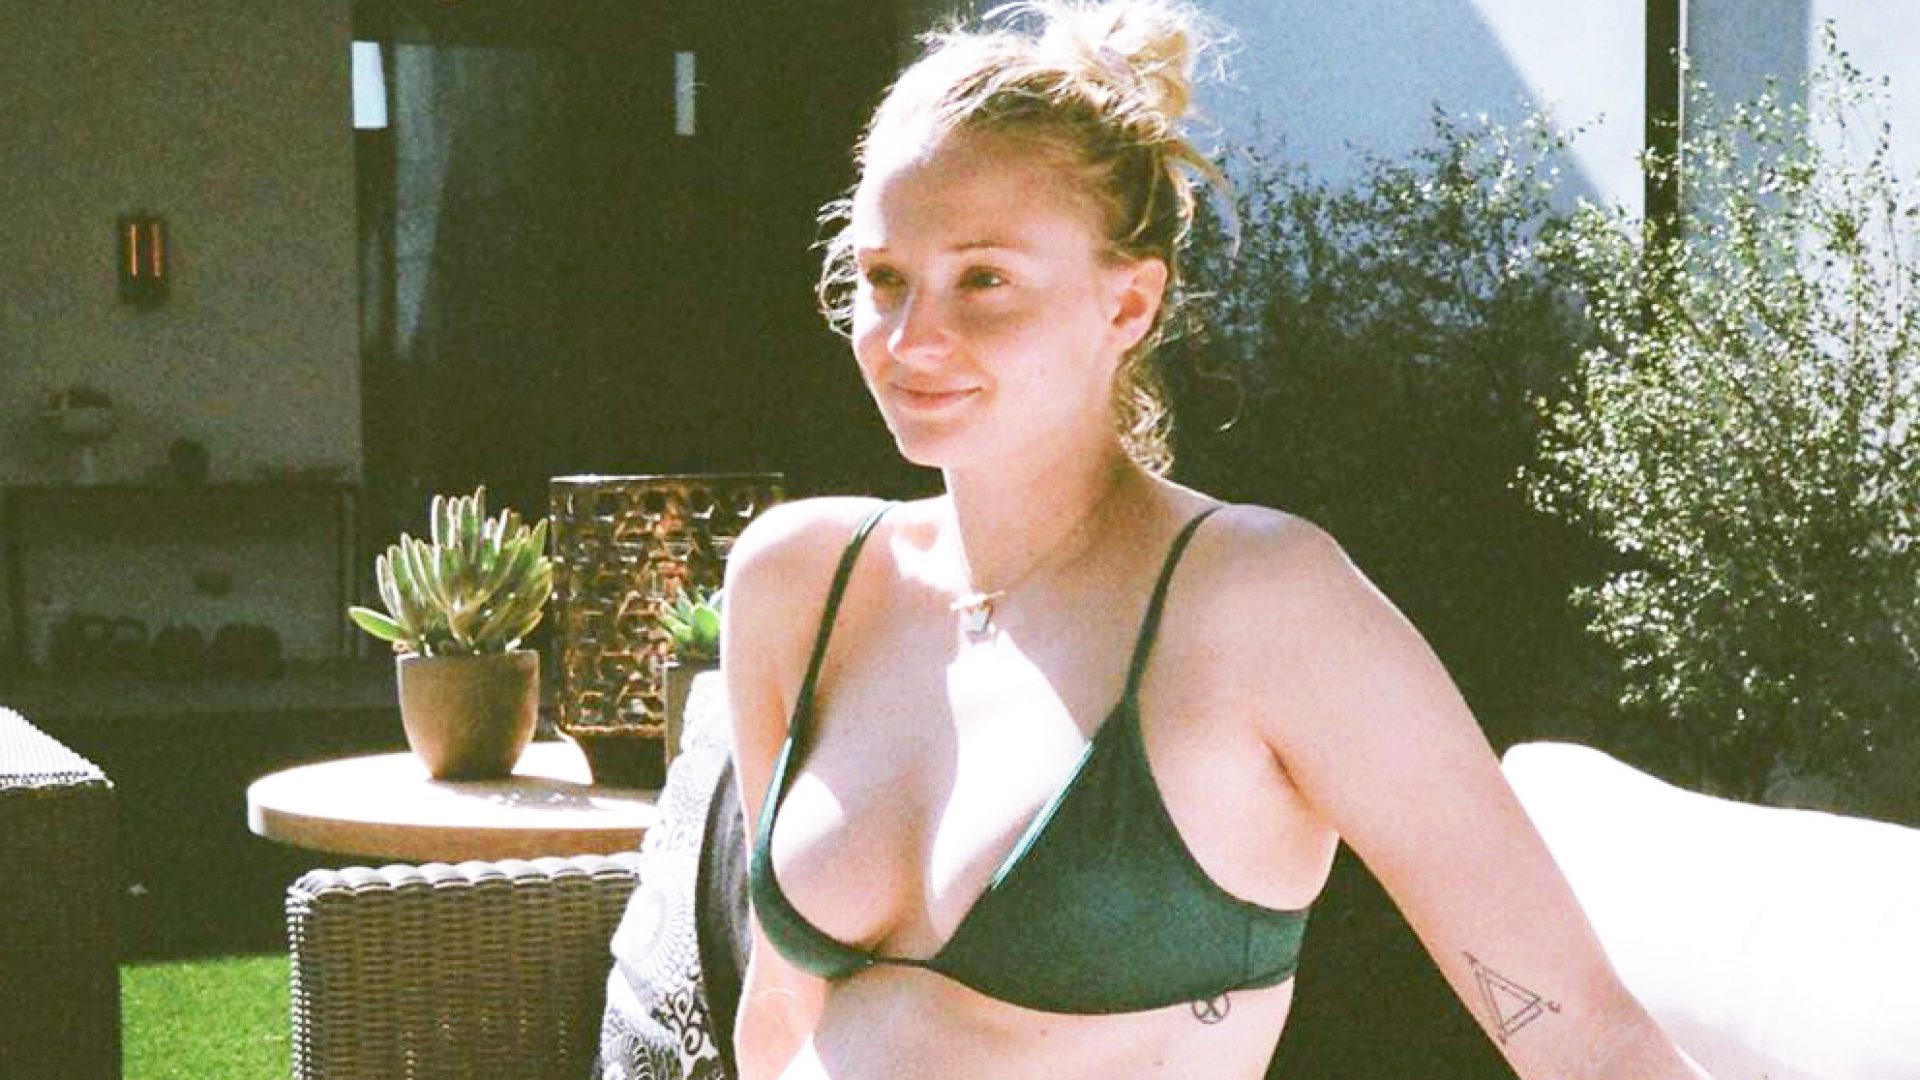 brian subia recommends sophie turner bikni pic